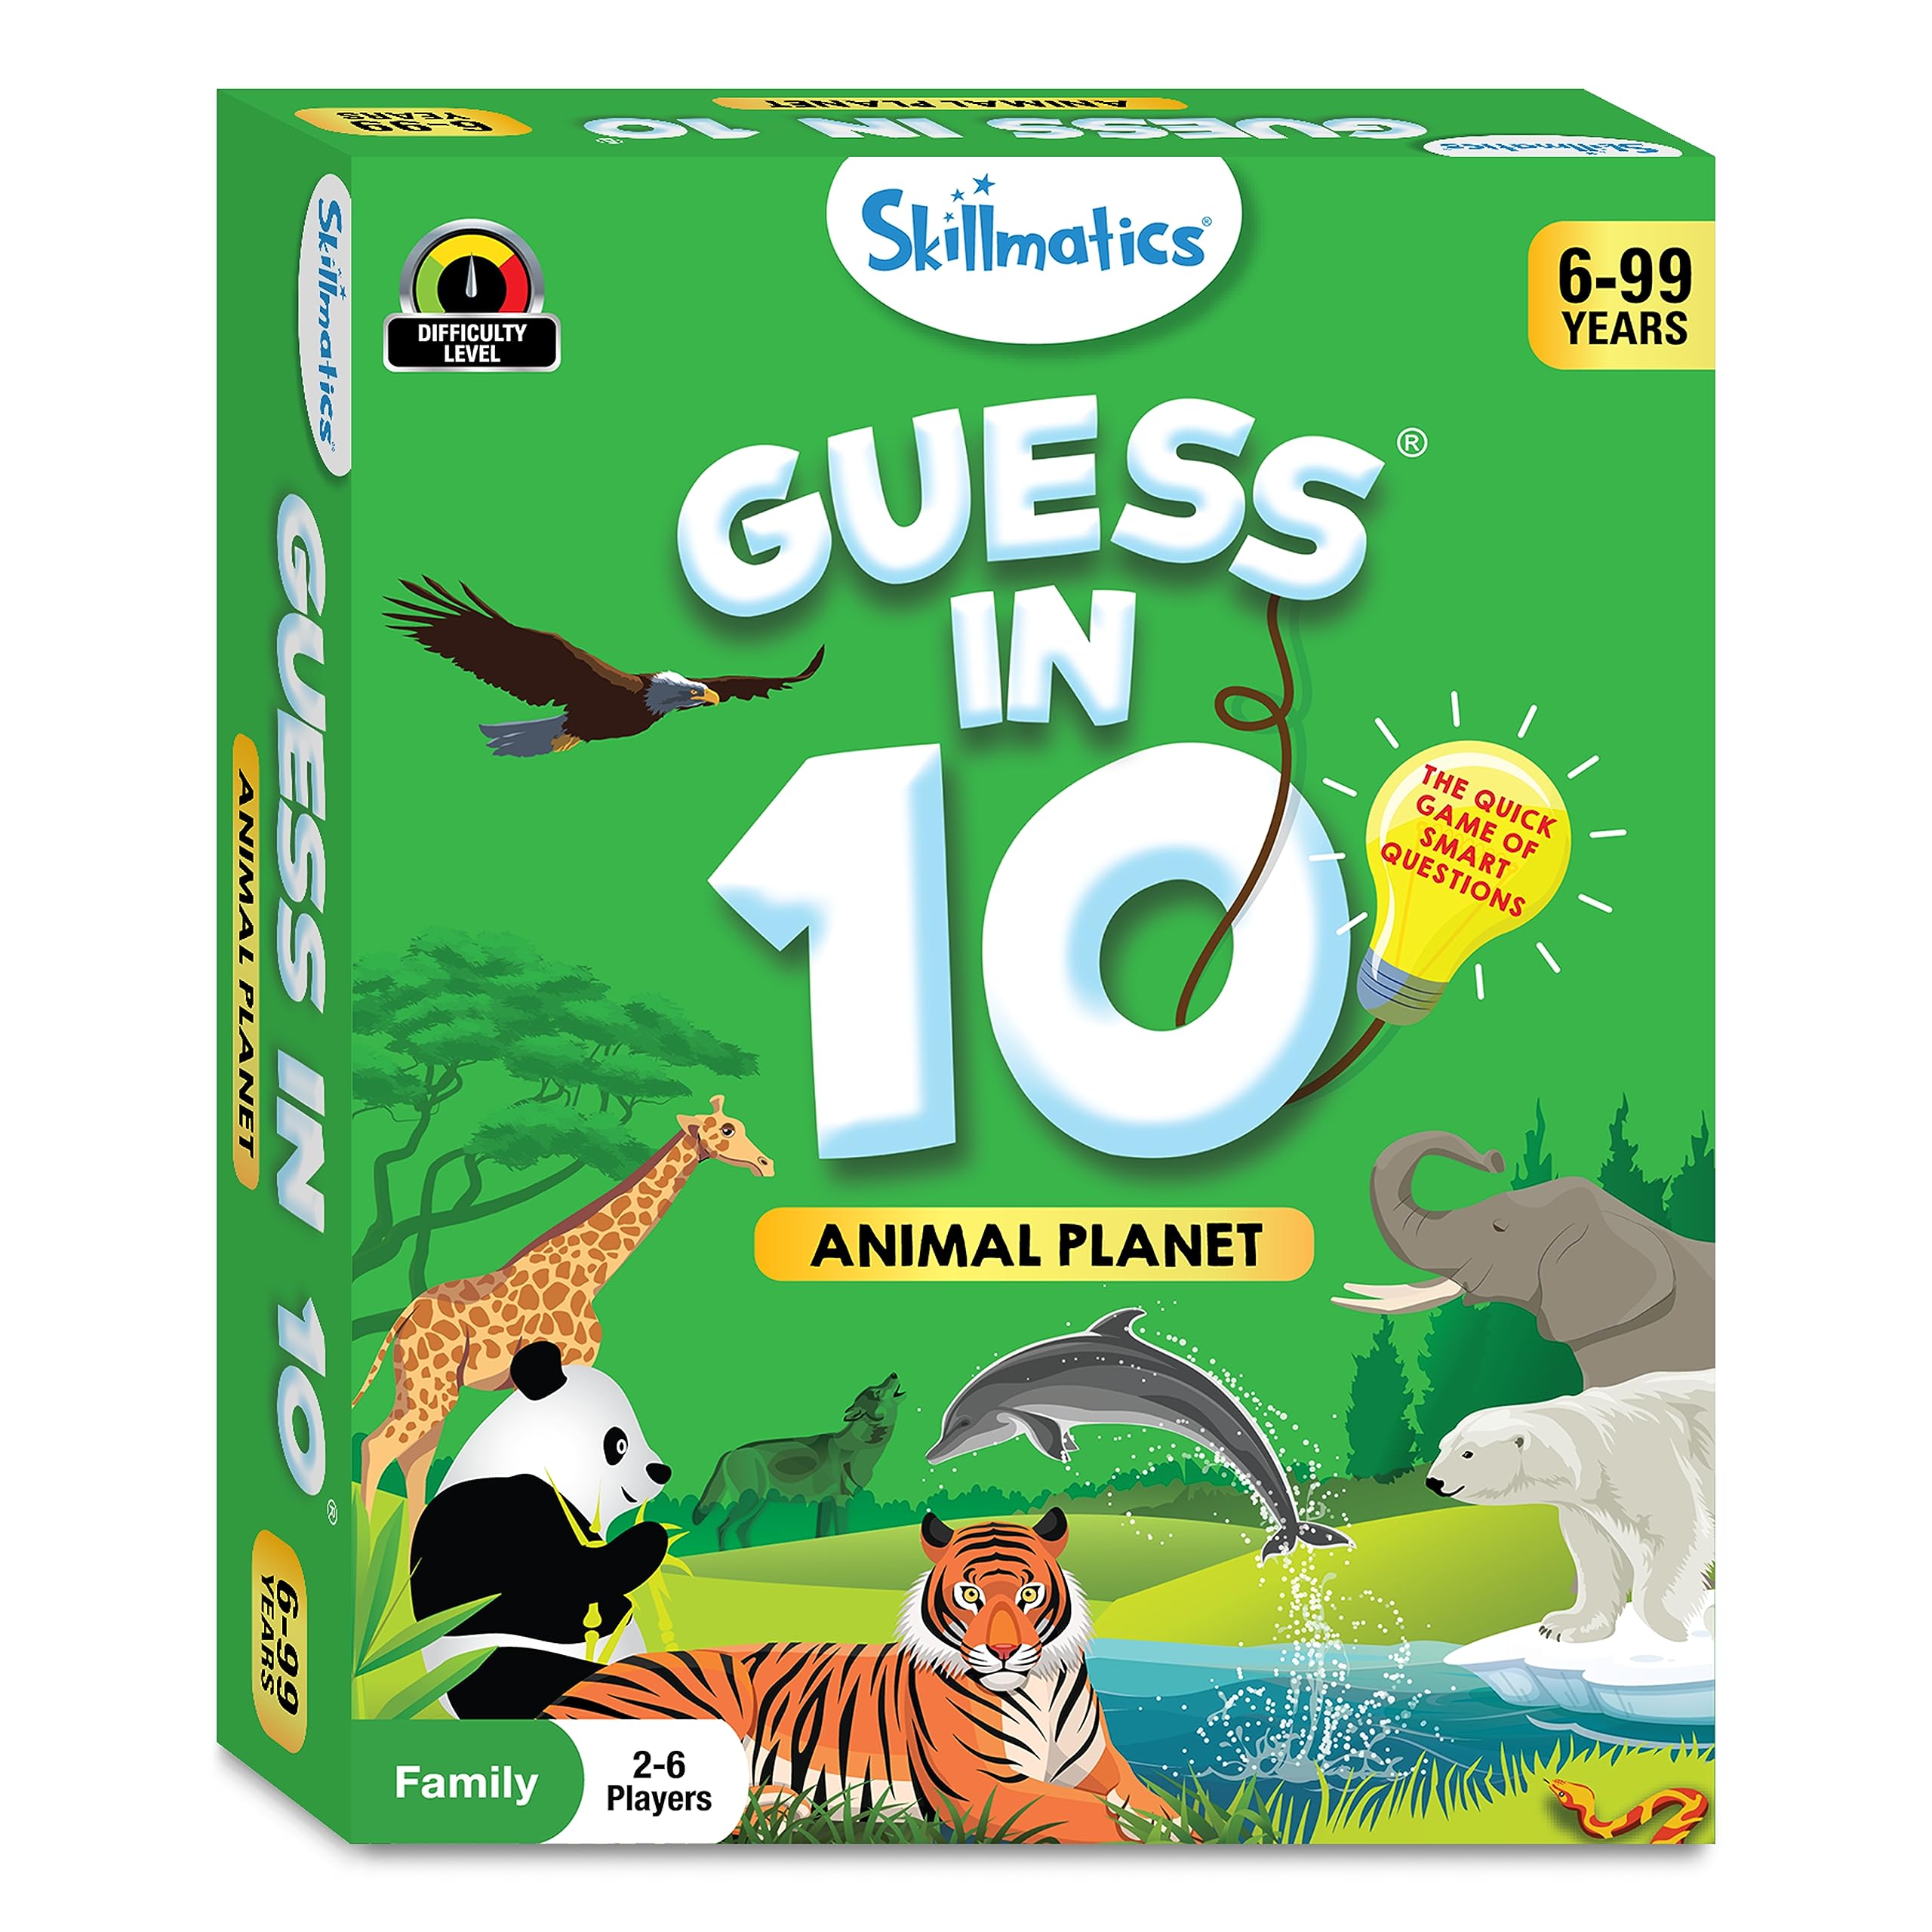 Skillmatics Card Game - Guess in 10 Animal Planet, Gifts for 6, 7, 8, 9 Year Olds and Up, Quick Game of Smart Questions, Fun Family Game